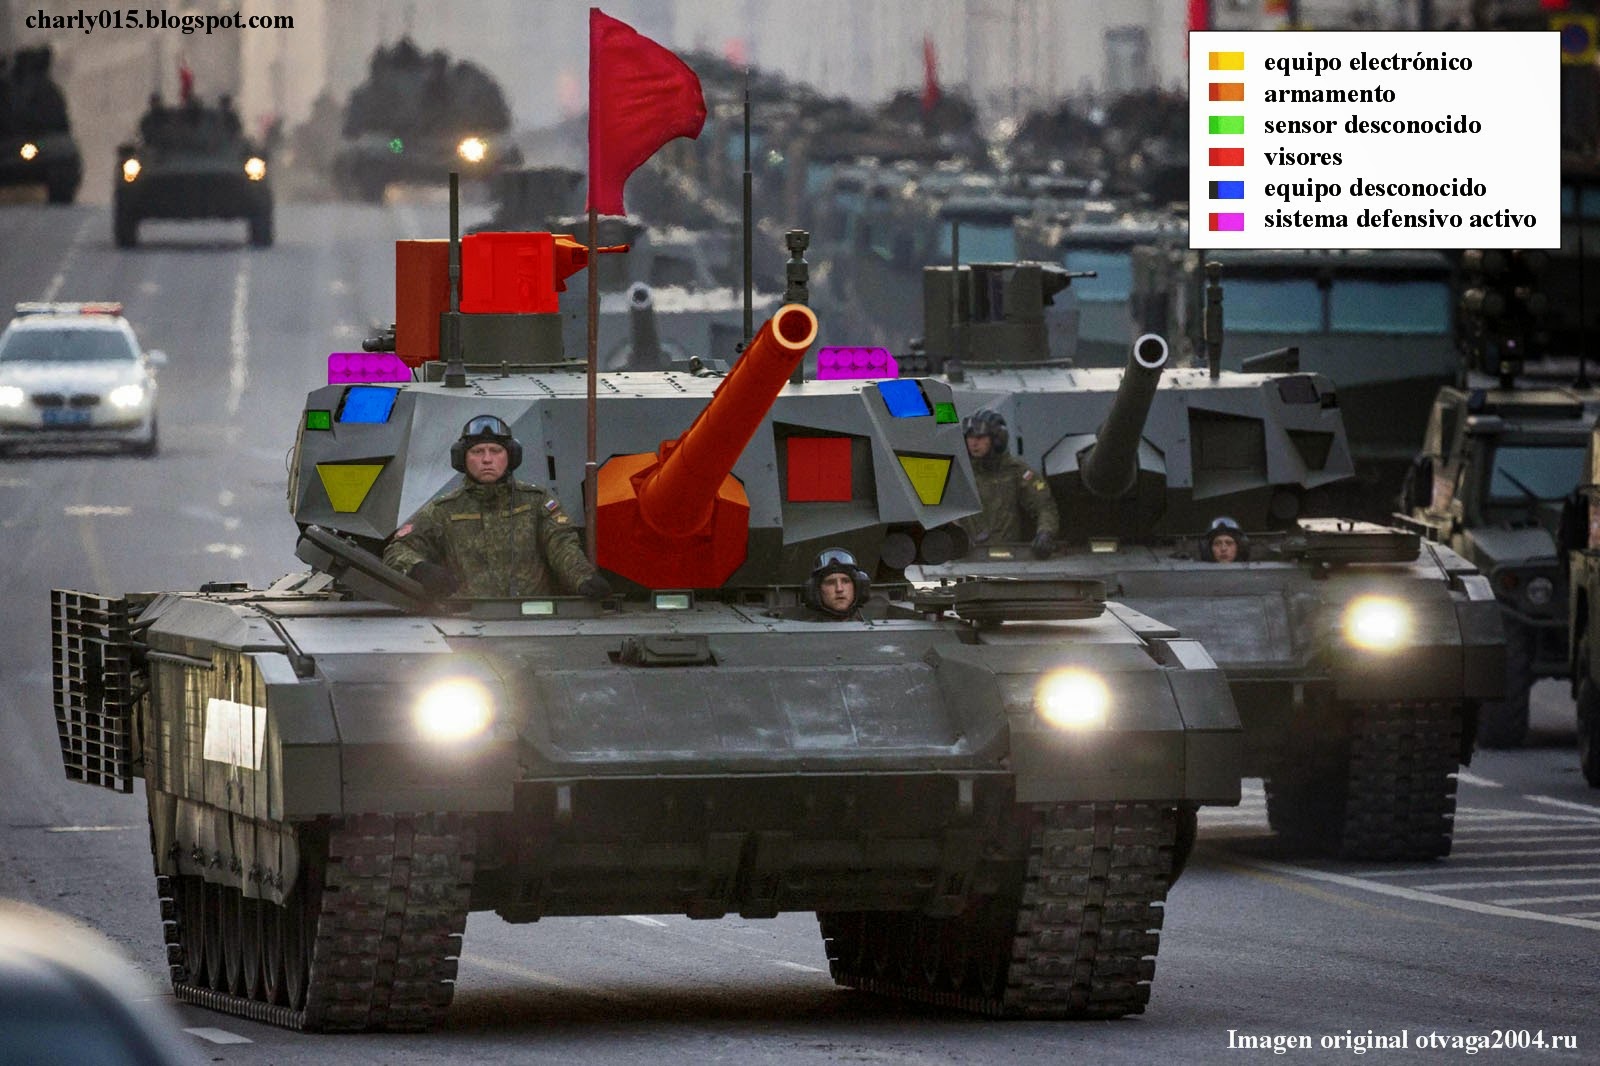 armata%2Bequipos%2By%2Bsensores.jpg